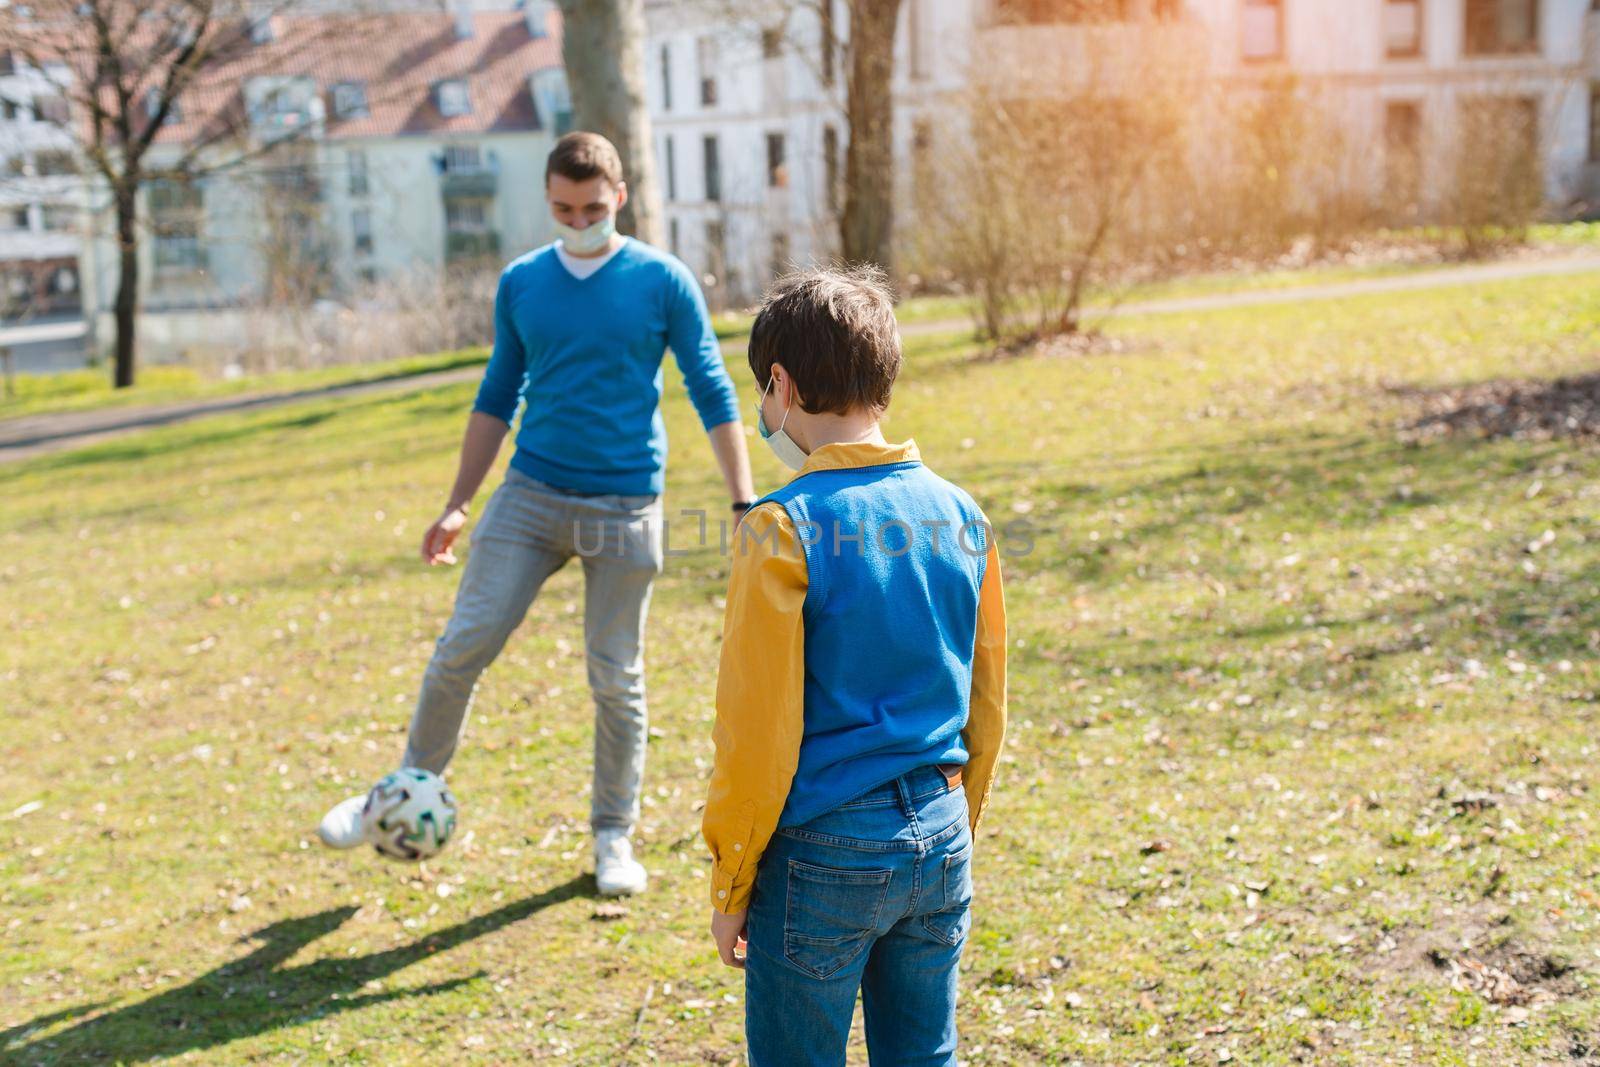 Dad and son playing soccer in park during coronavirus crisis by Kzenon